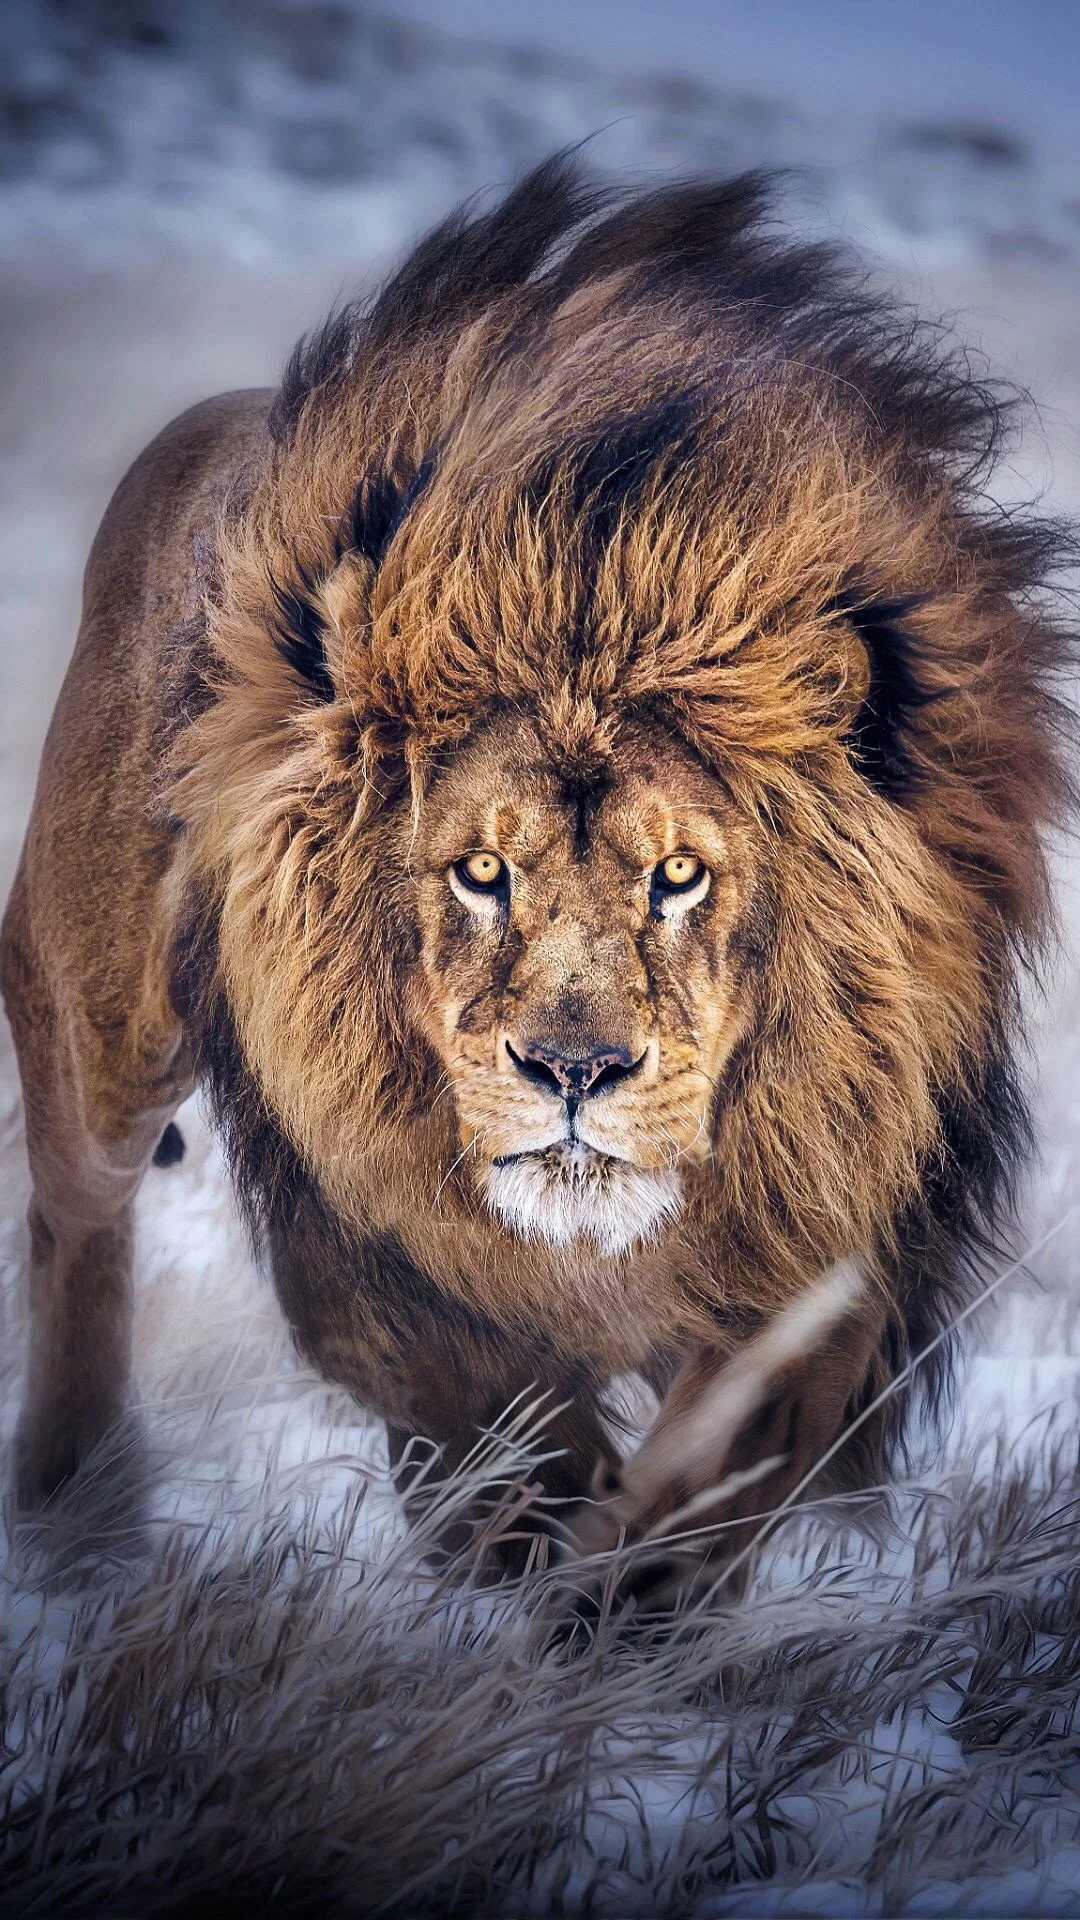 Lion wallpaper for iPhone. iPhone 6